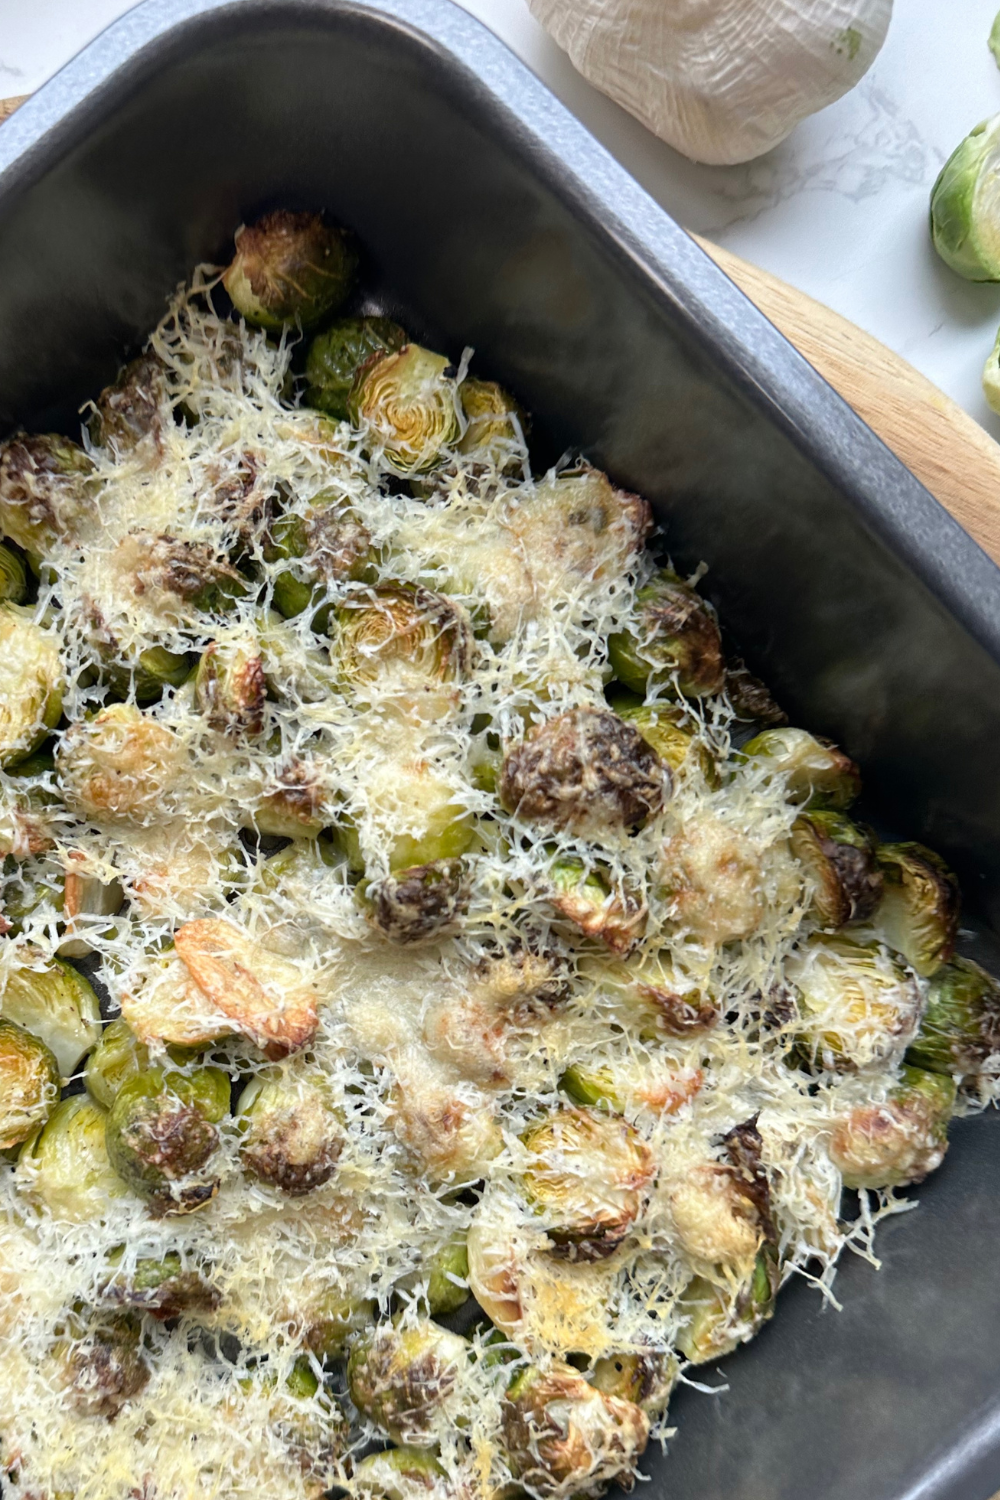 Parmesan and garlic roasted brussels sprouts bariatric surgery recipe